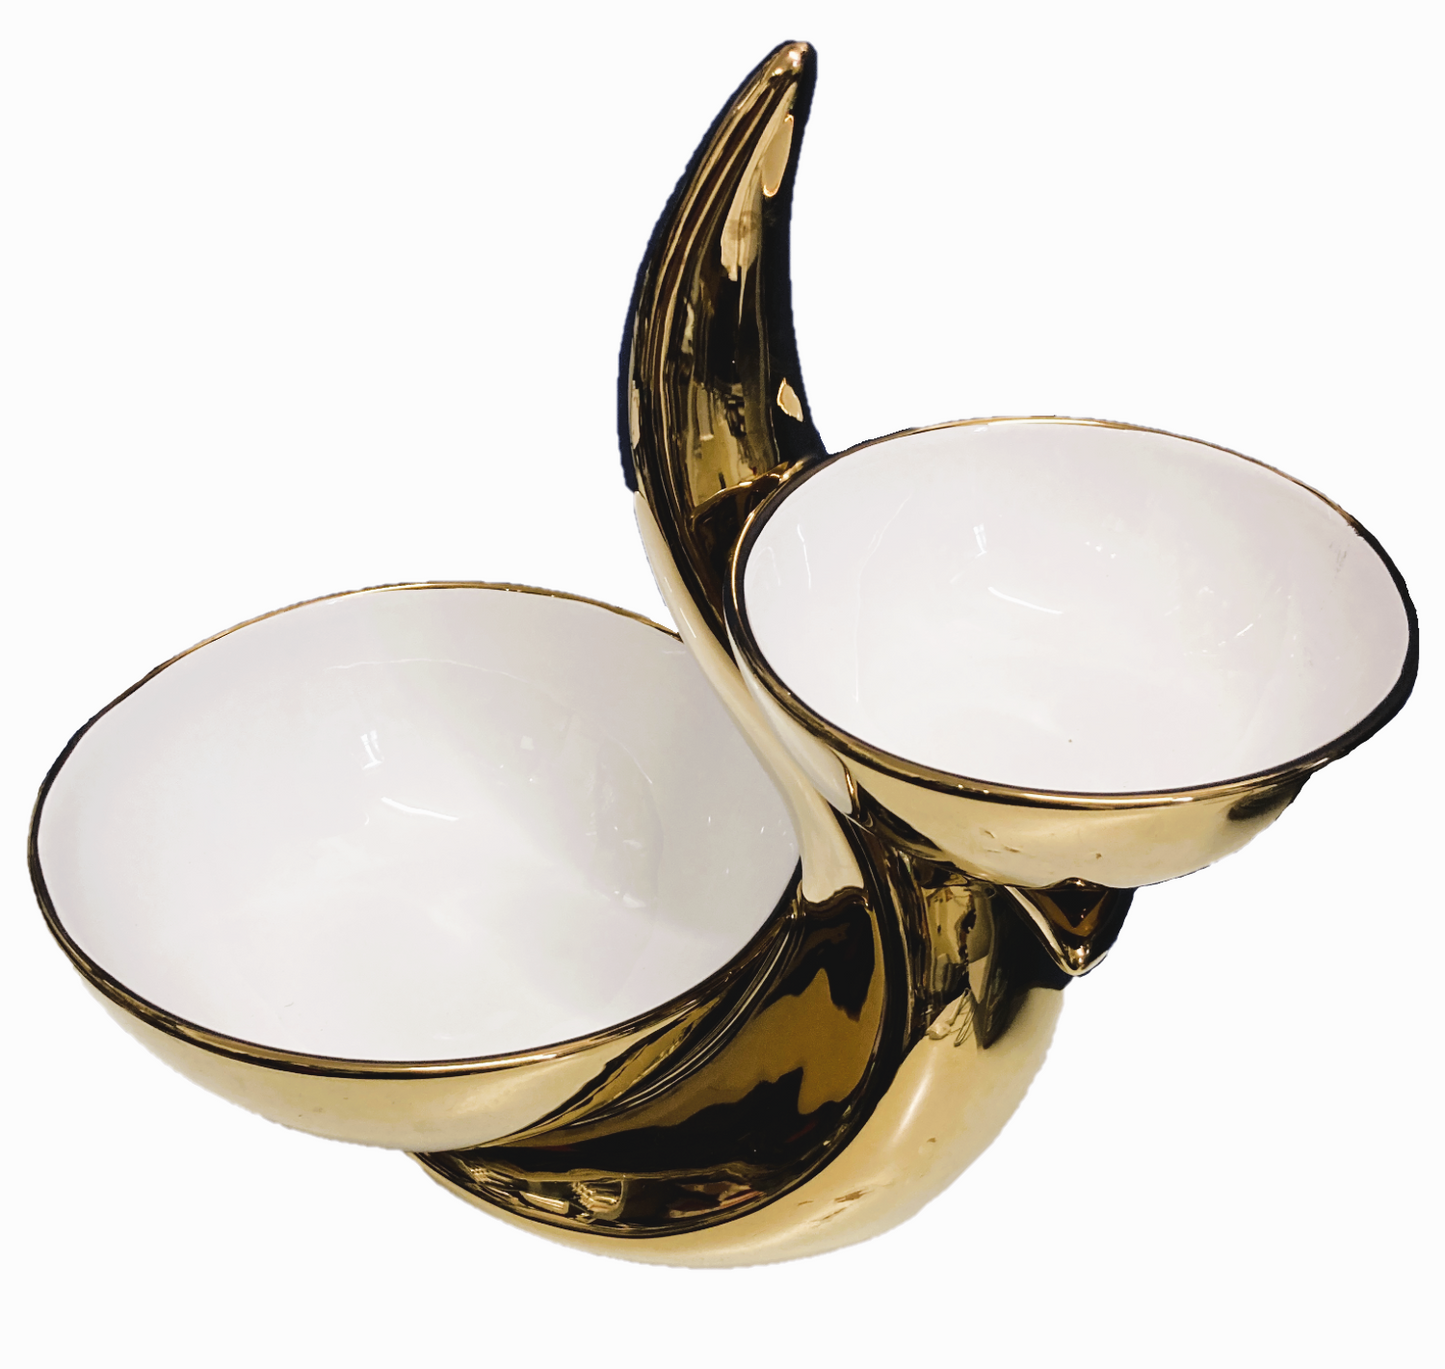 Small 2 Tier Gold Plated Decorative Bowl